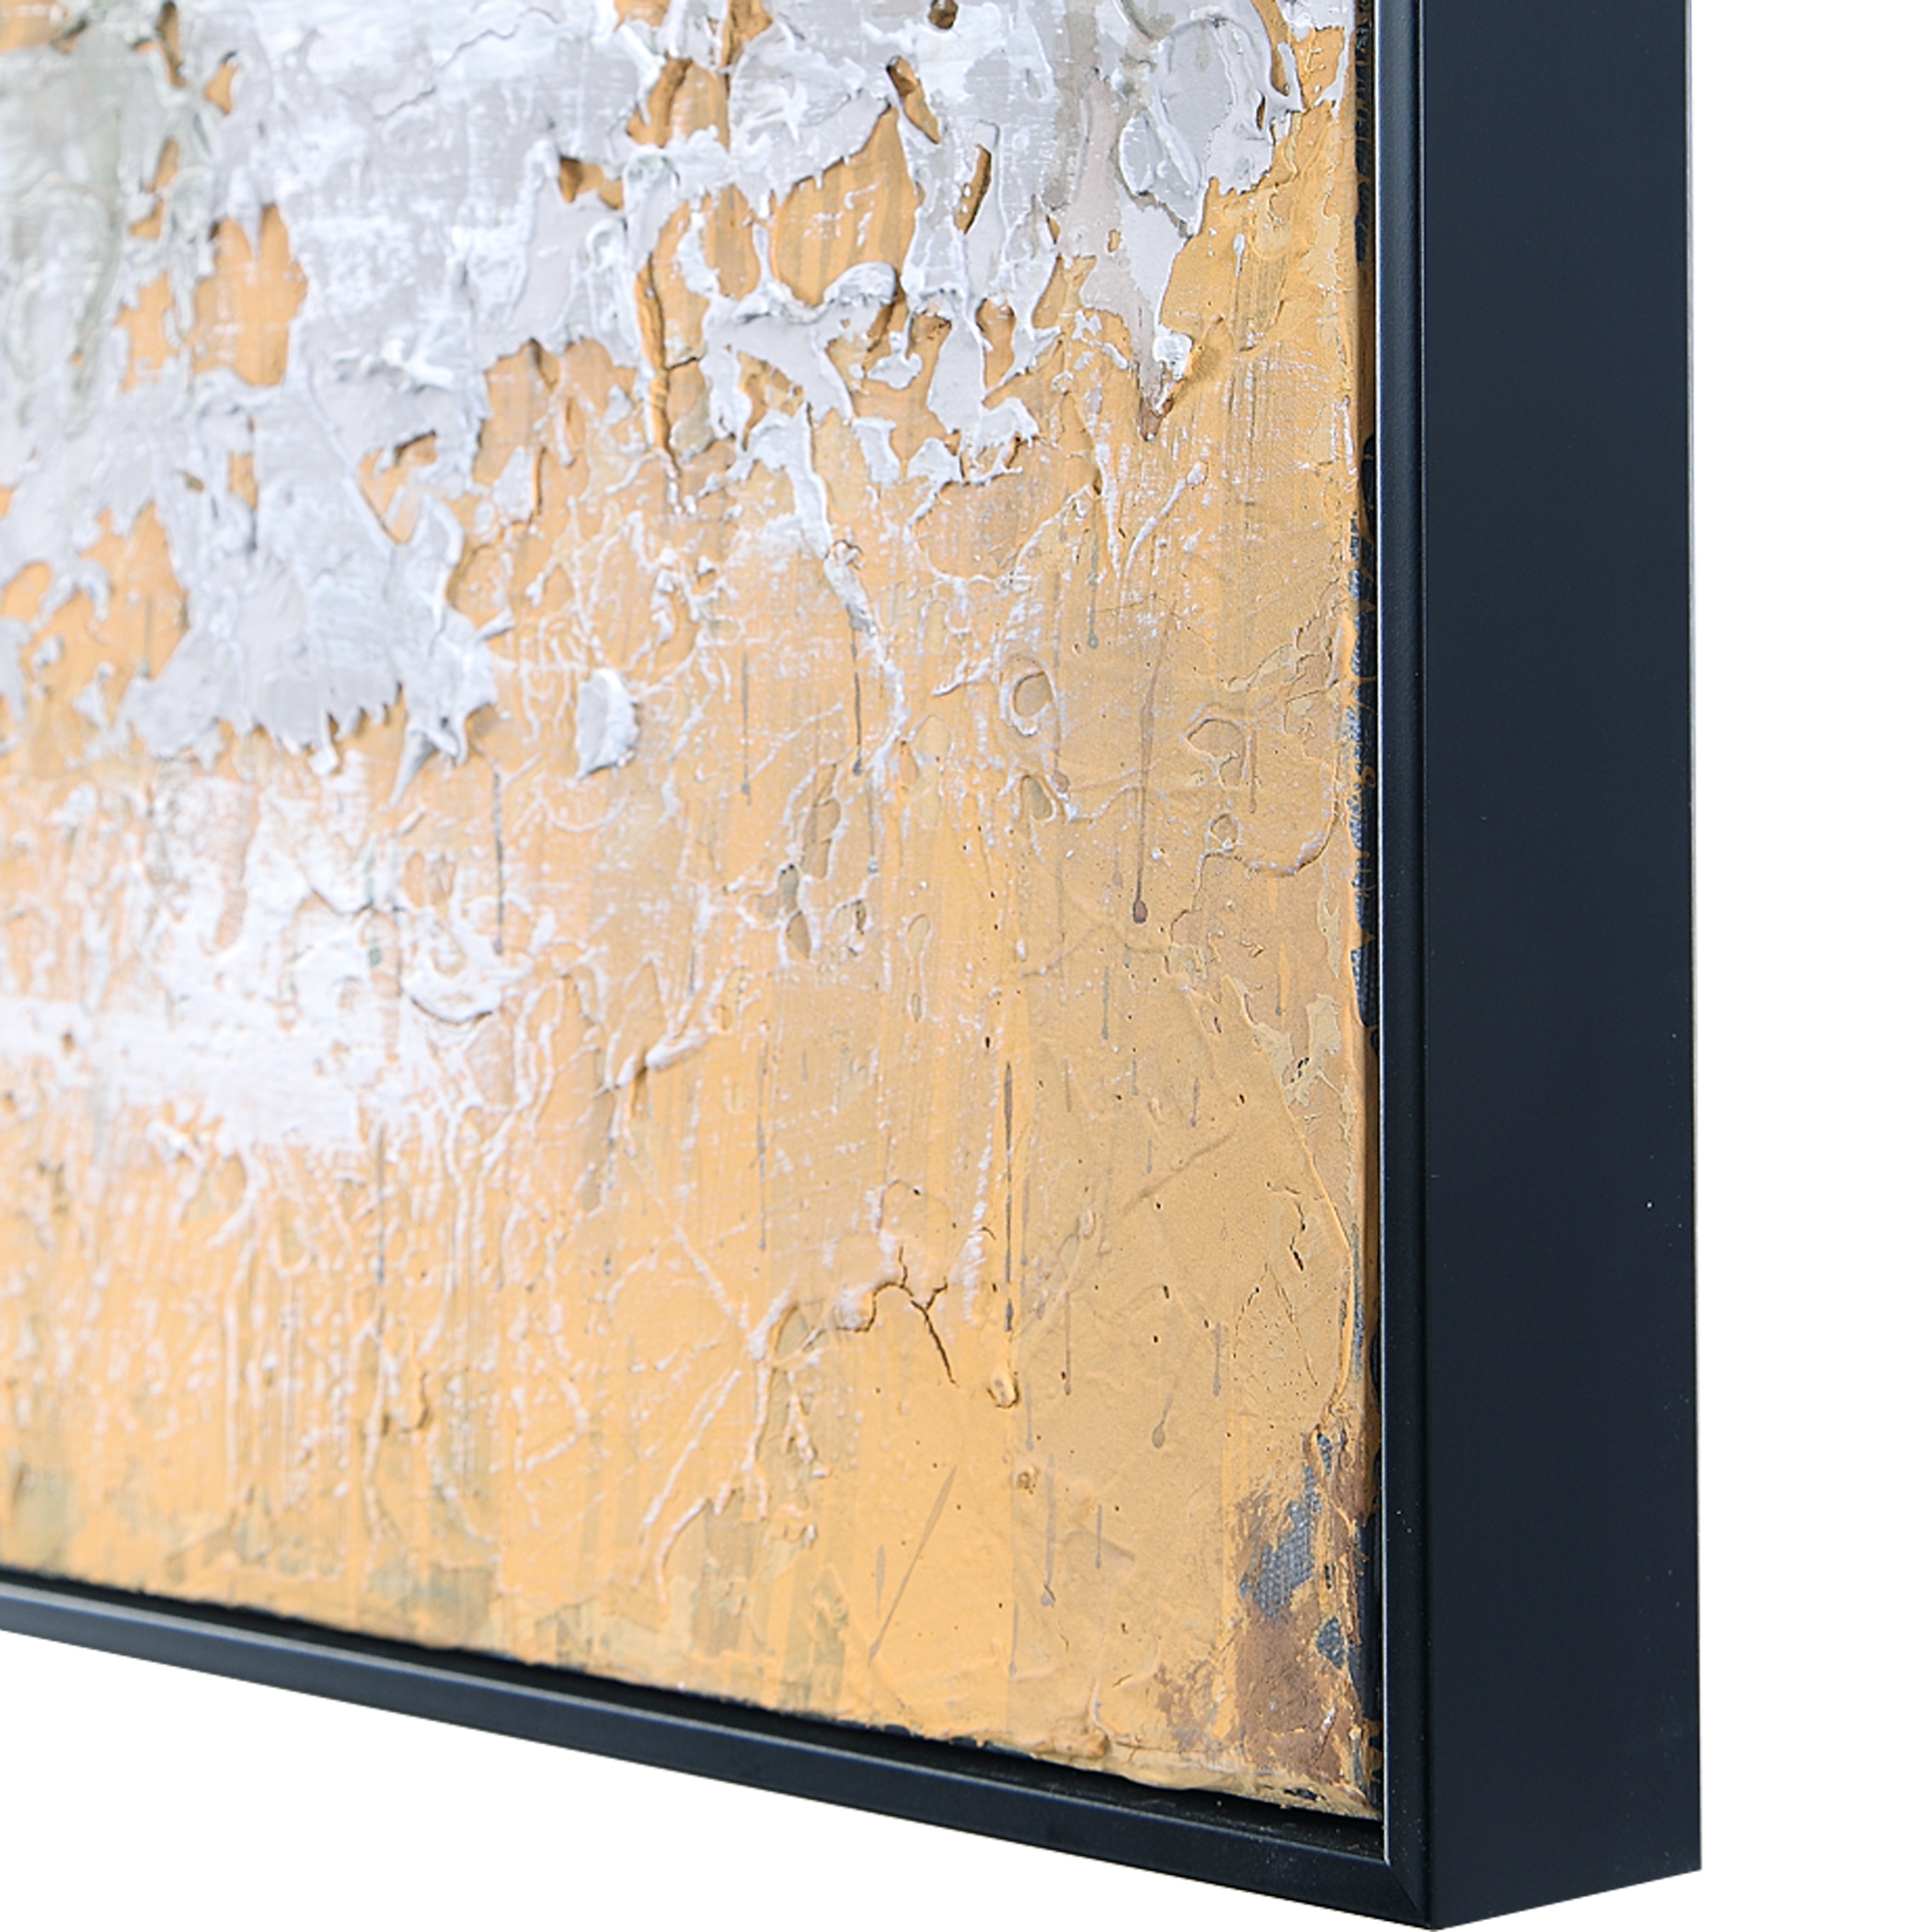 The Wall Abstract Art, 36" x 47.75" - DISCONTINUED - Image 3